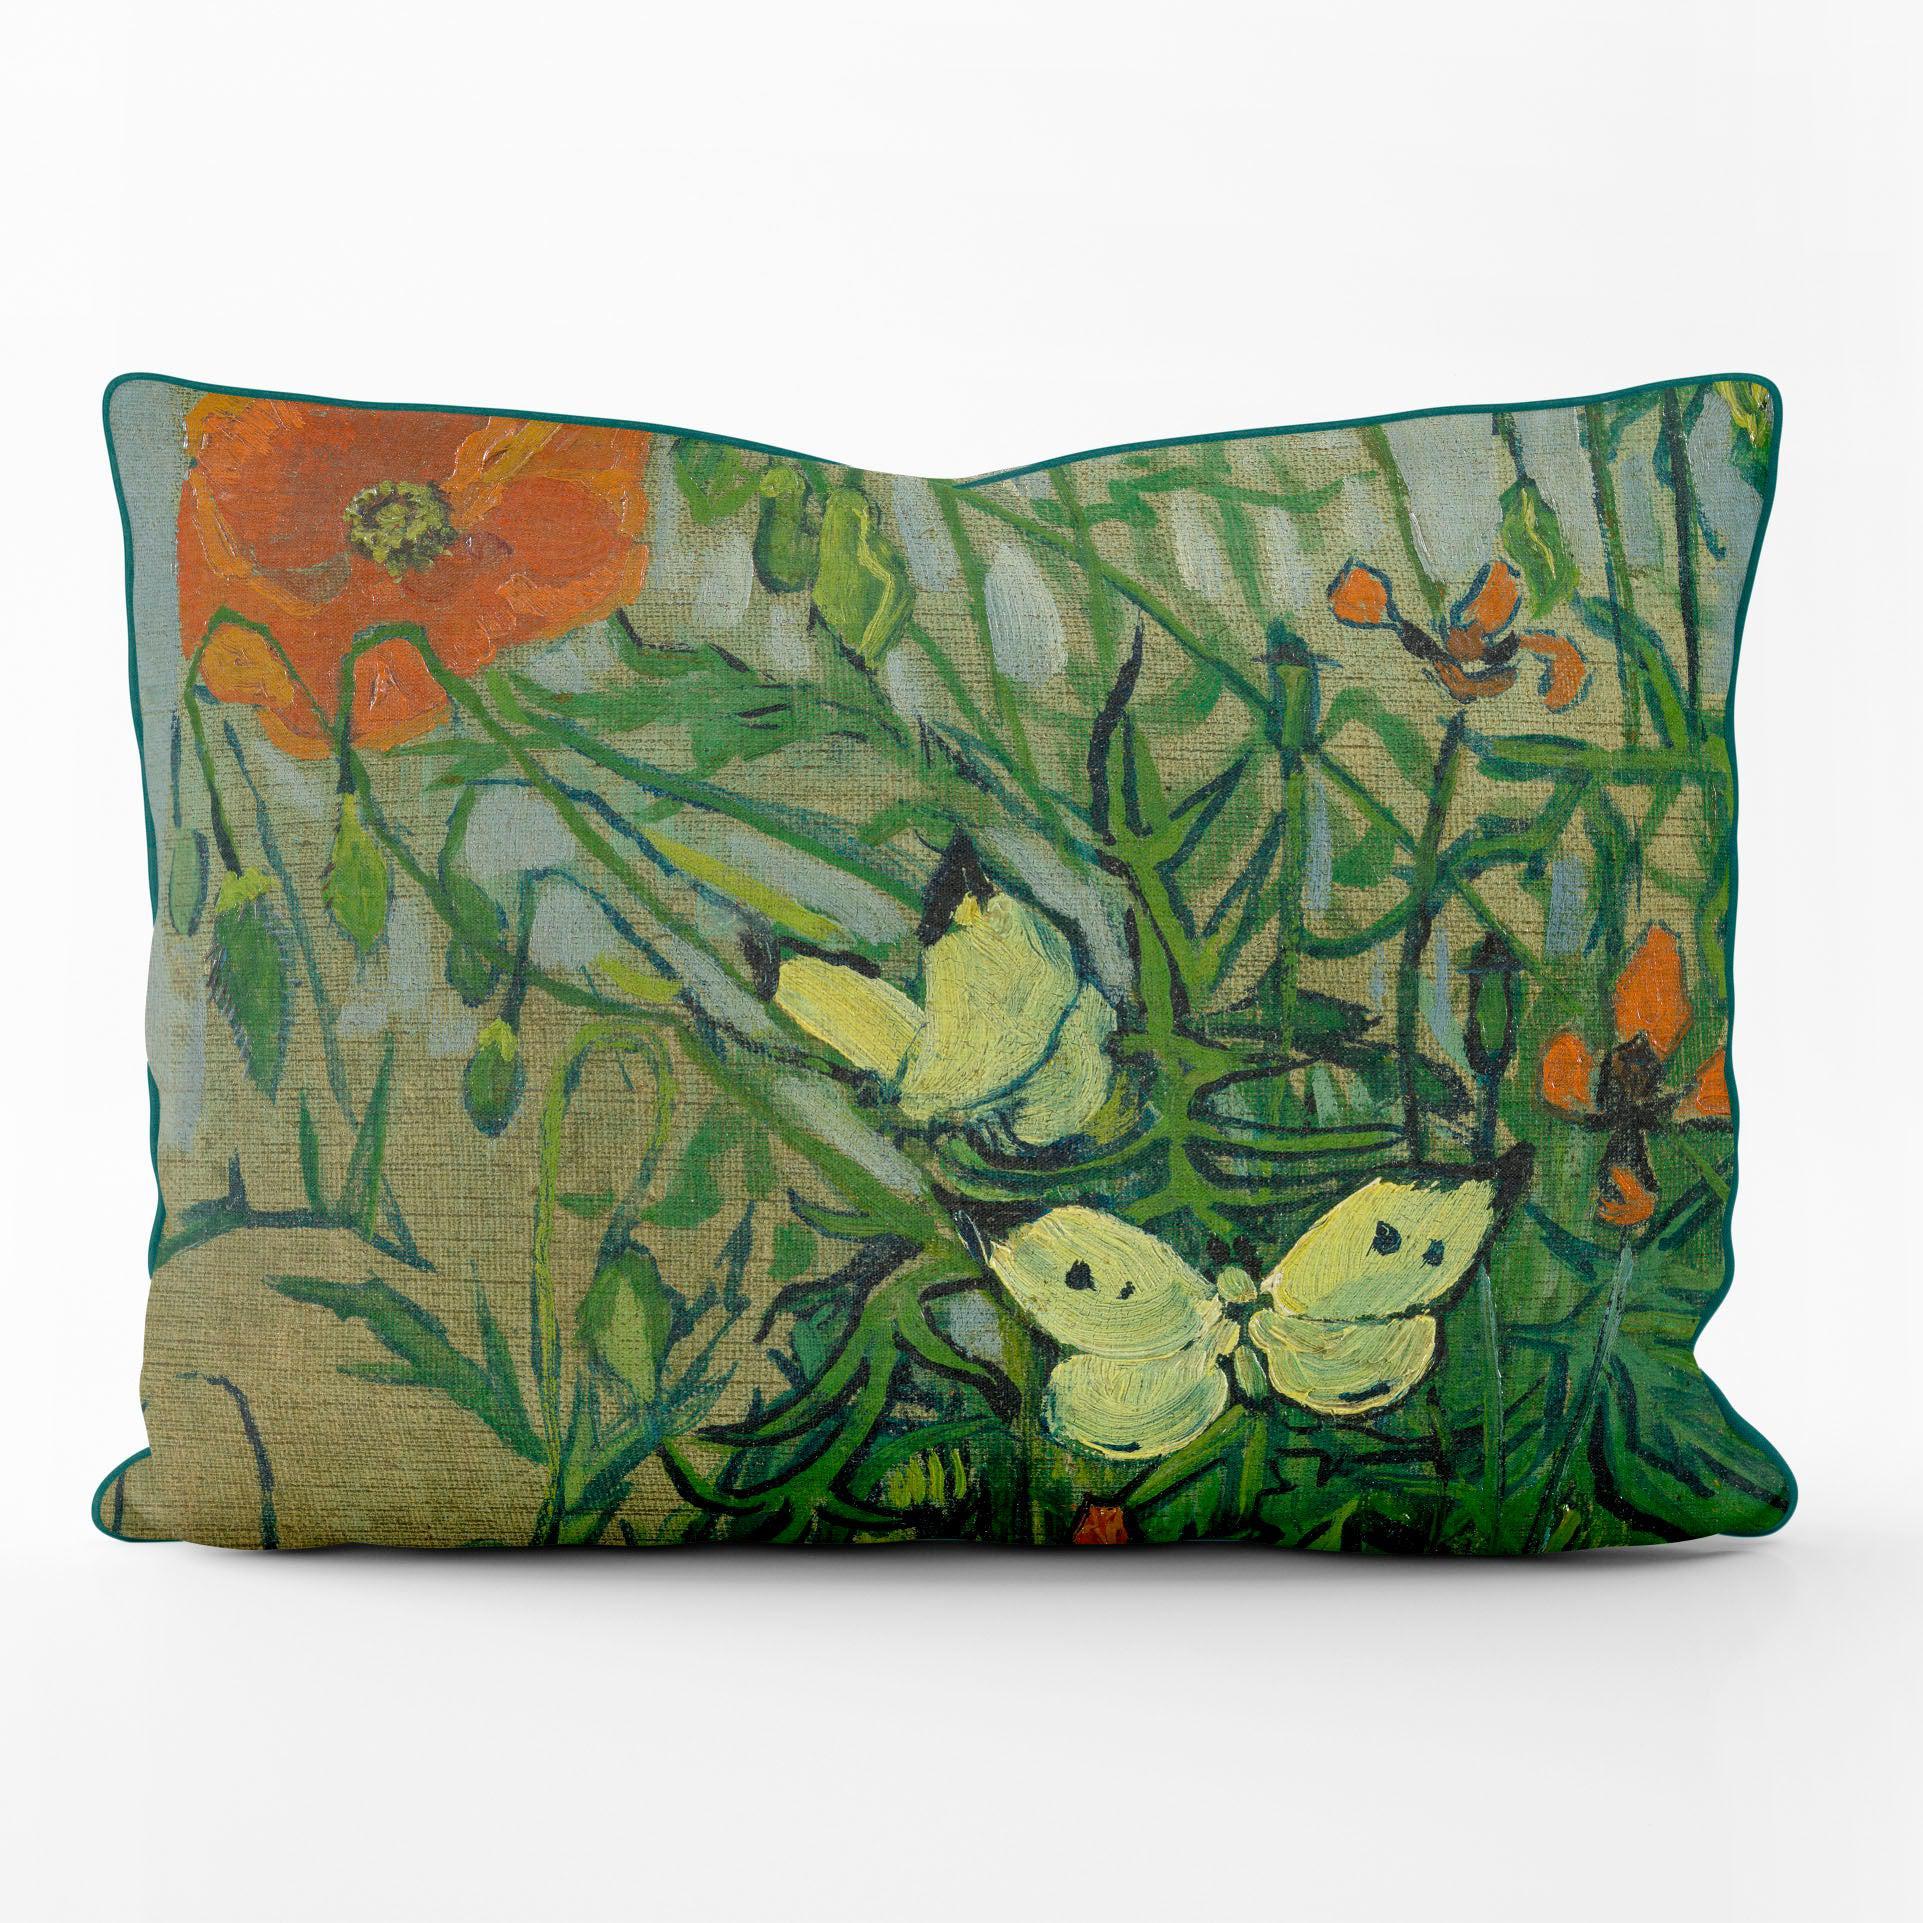 Poppies and Butterflies - Van Gogh Museum Outdoor Cushion